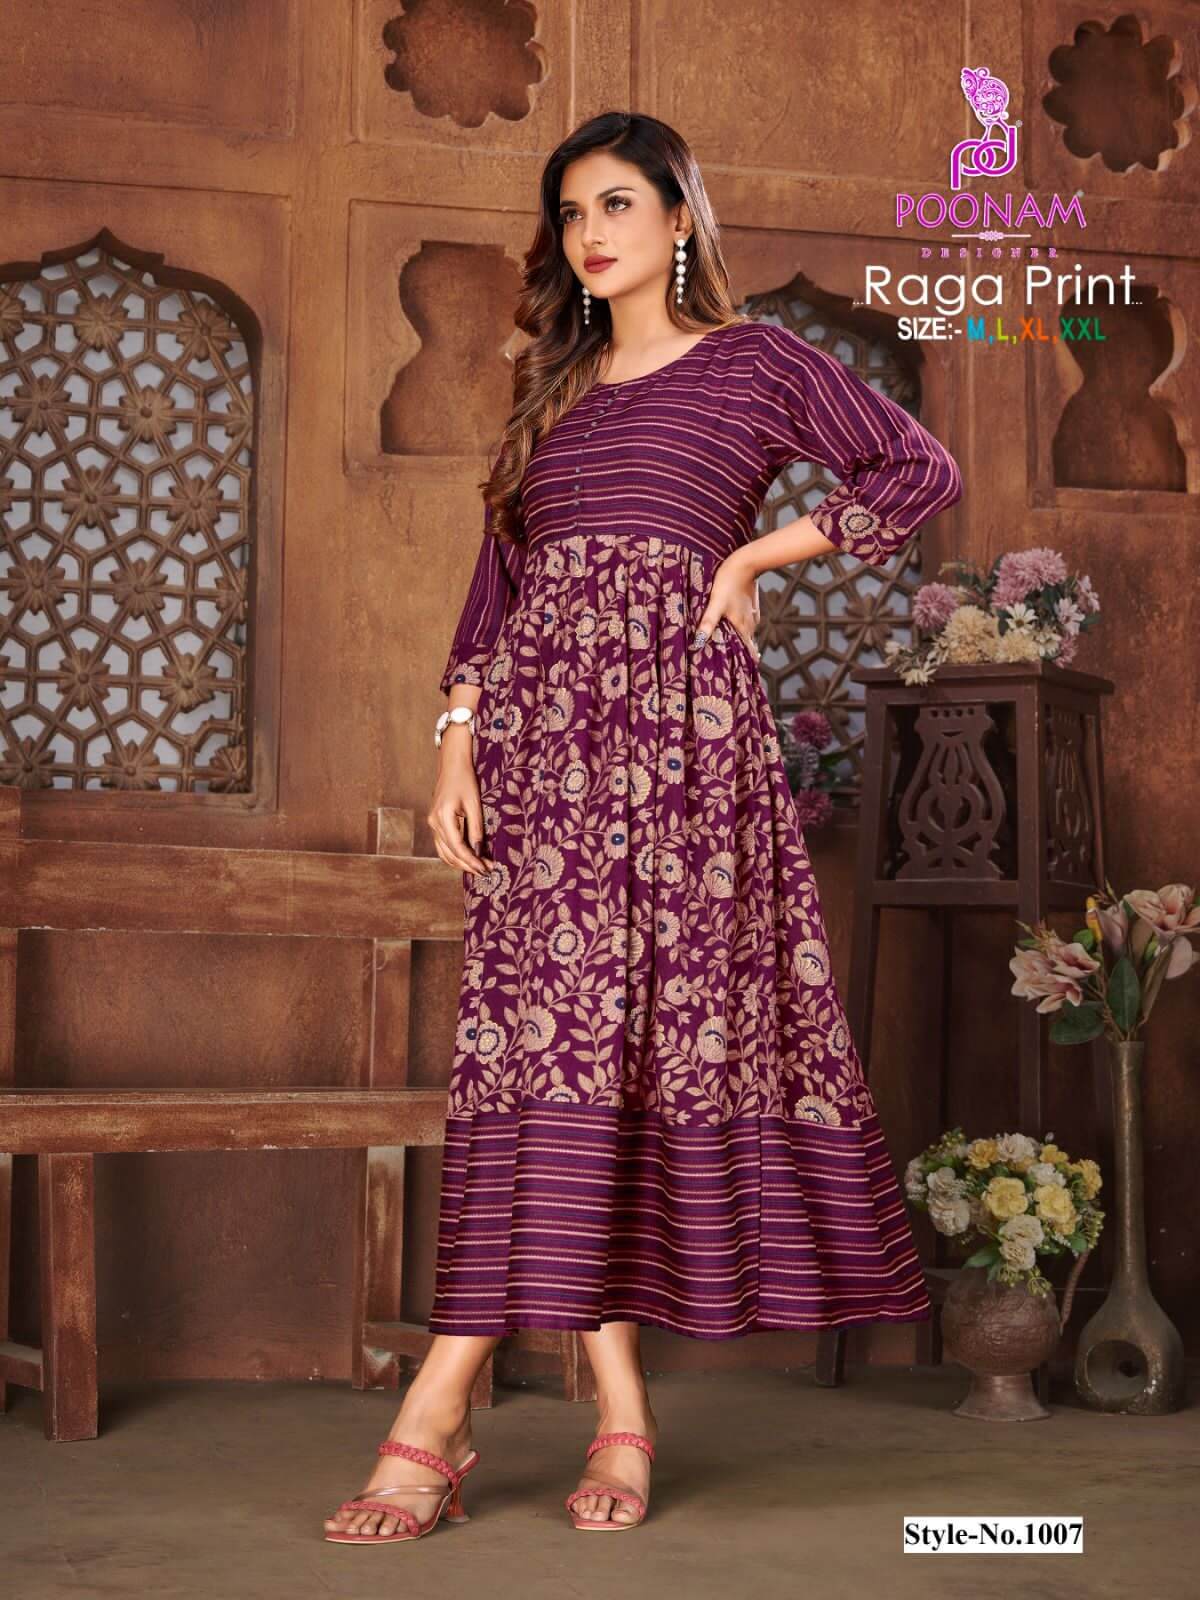 Poonam Raga Print Gowns Catalog collection 5